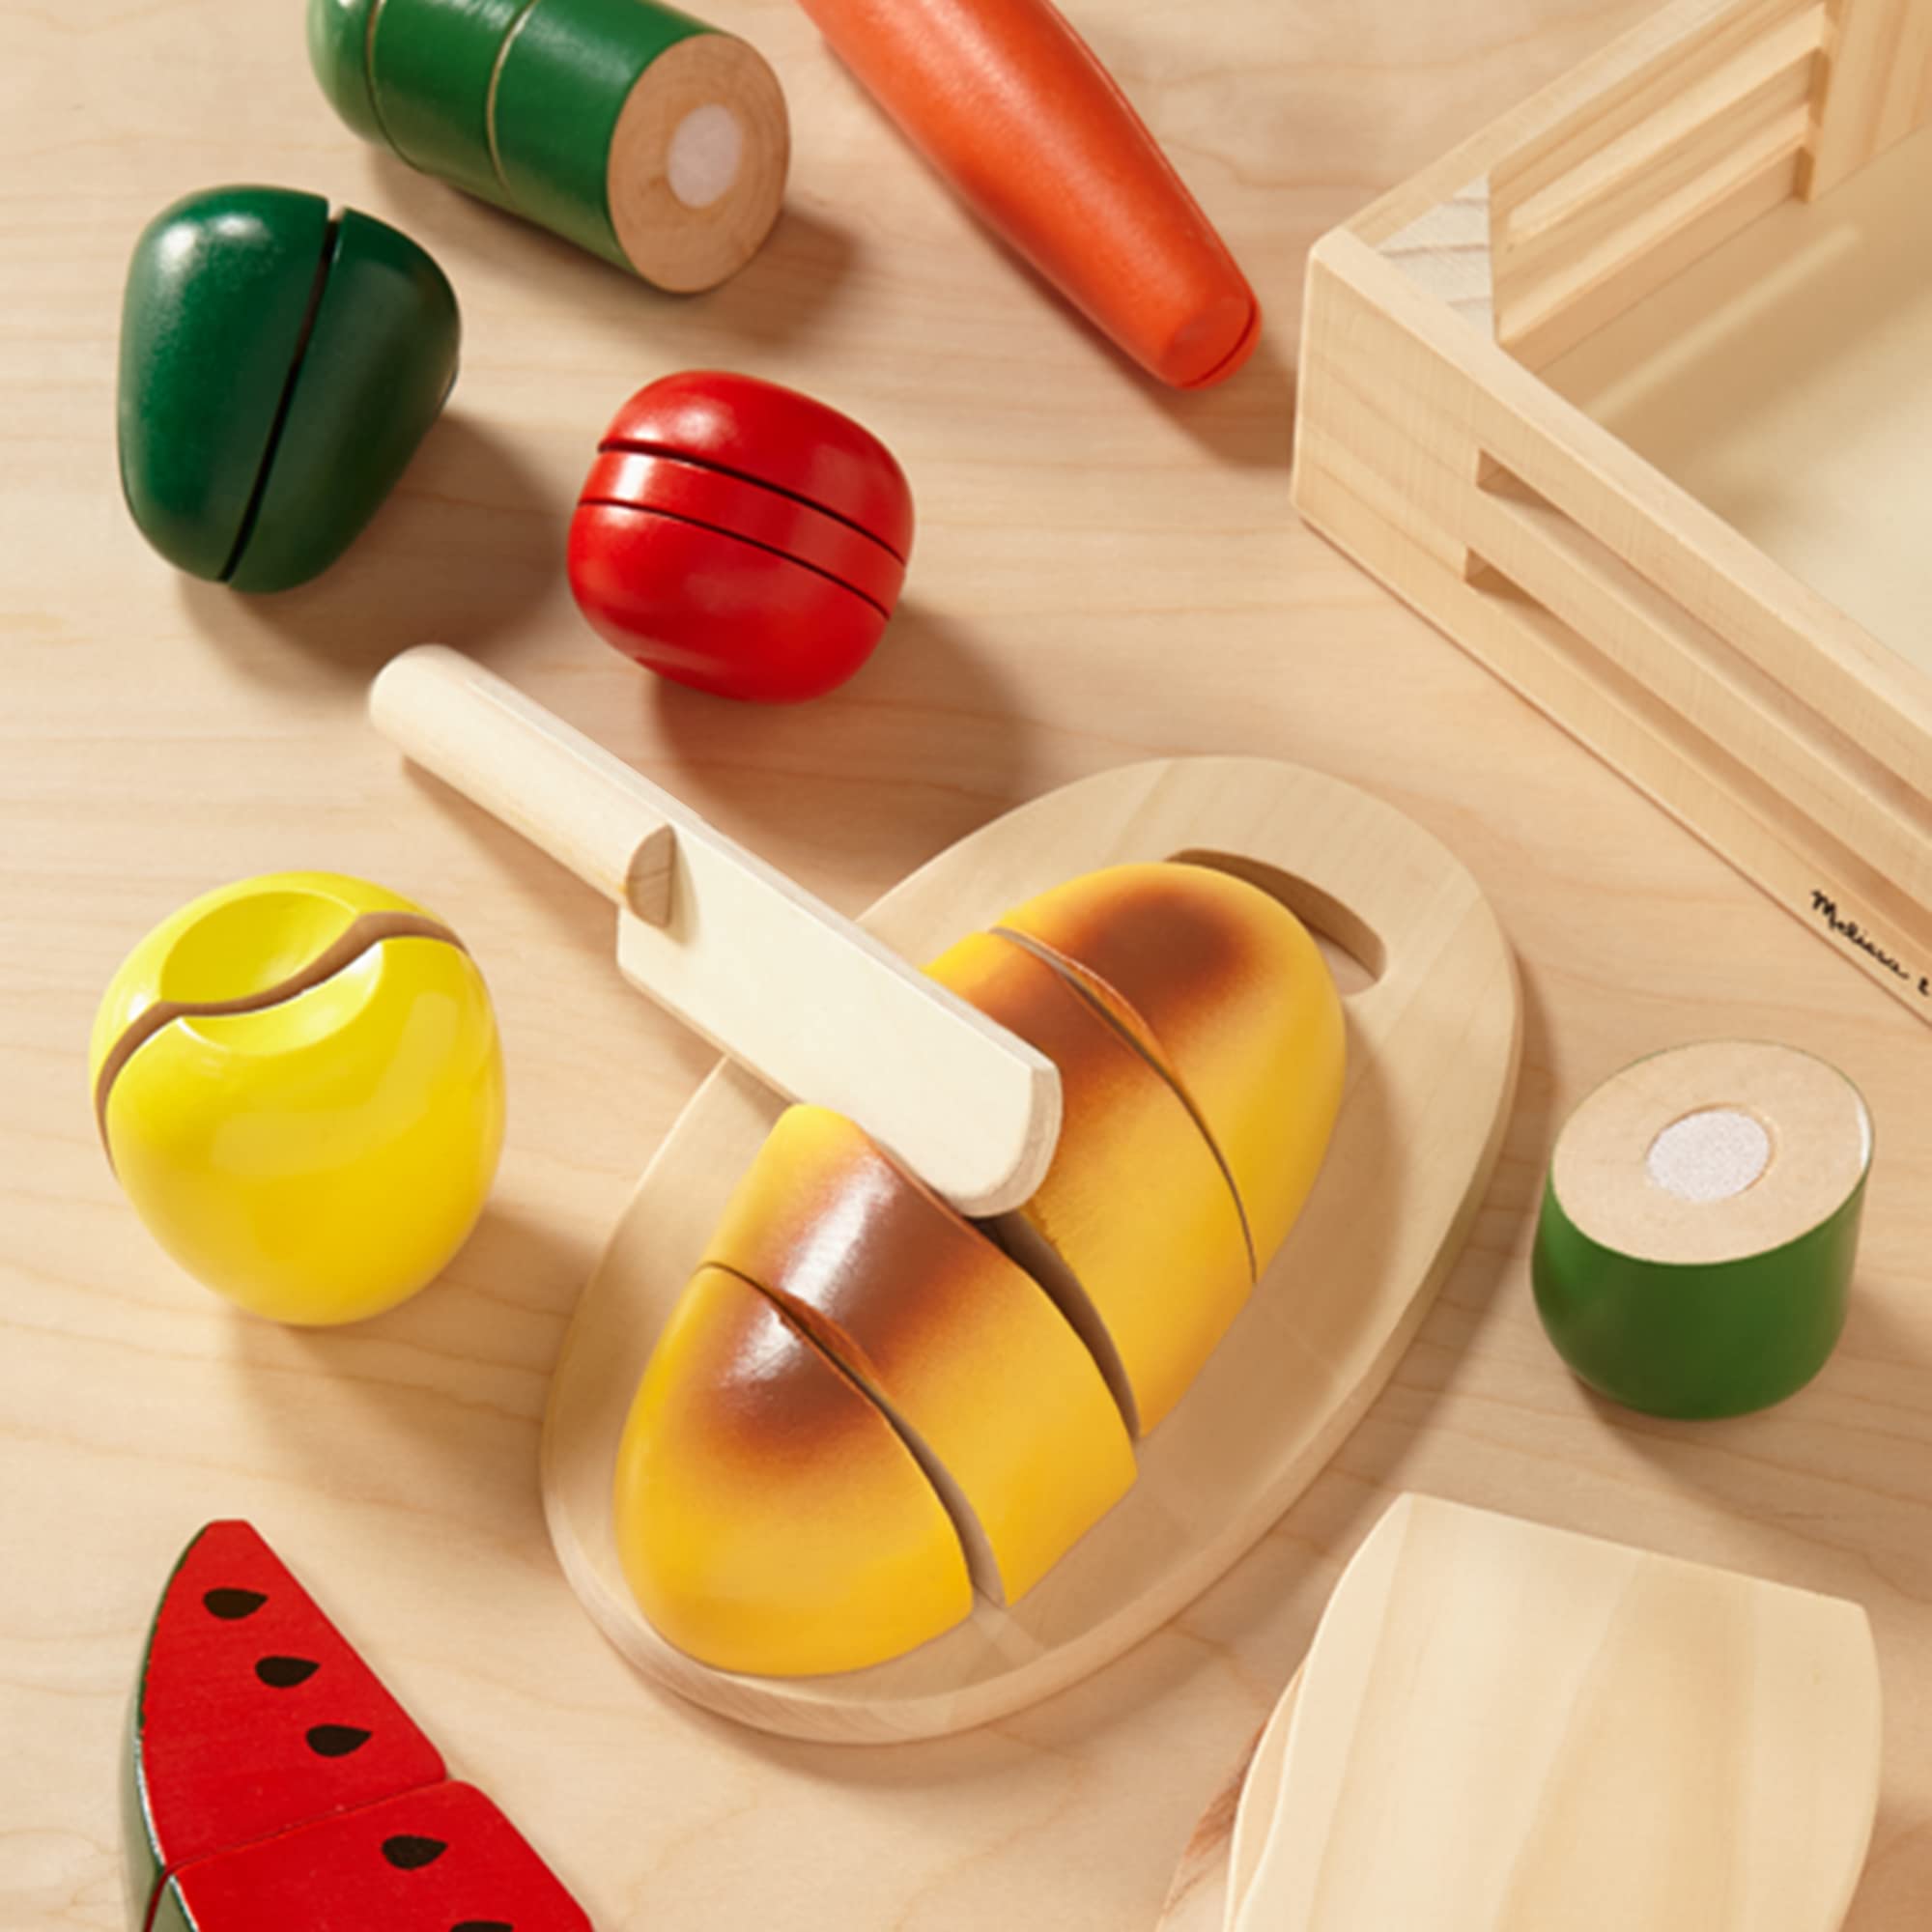 Melissa & Doug Cutting Food - Play Set With 25+ Hand-Painted Wooden Pieces, Knife, and Cutting Board - Pretend Play Kitchen Fruit Toys For Toddlers And Kids Ages 3+